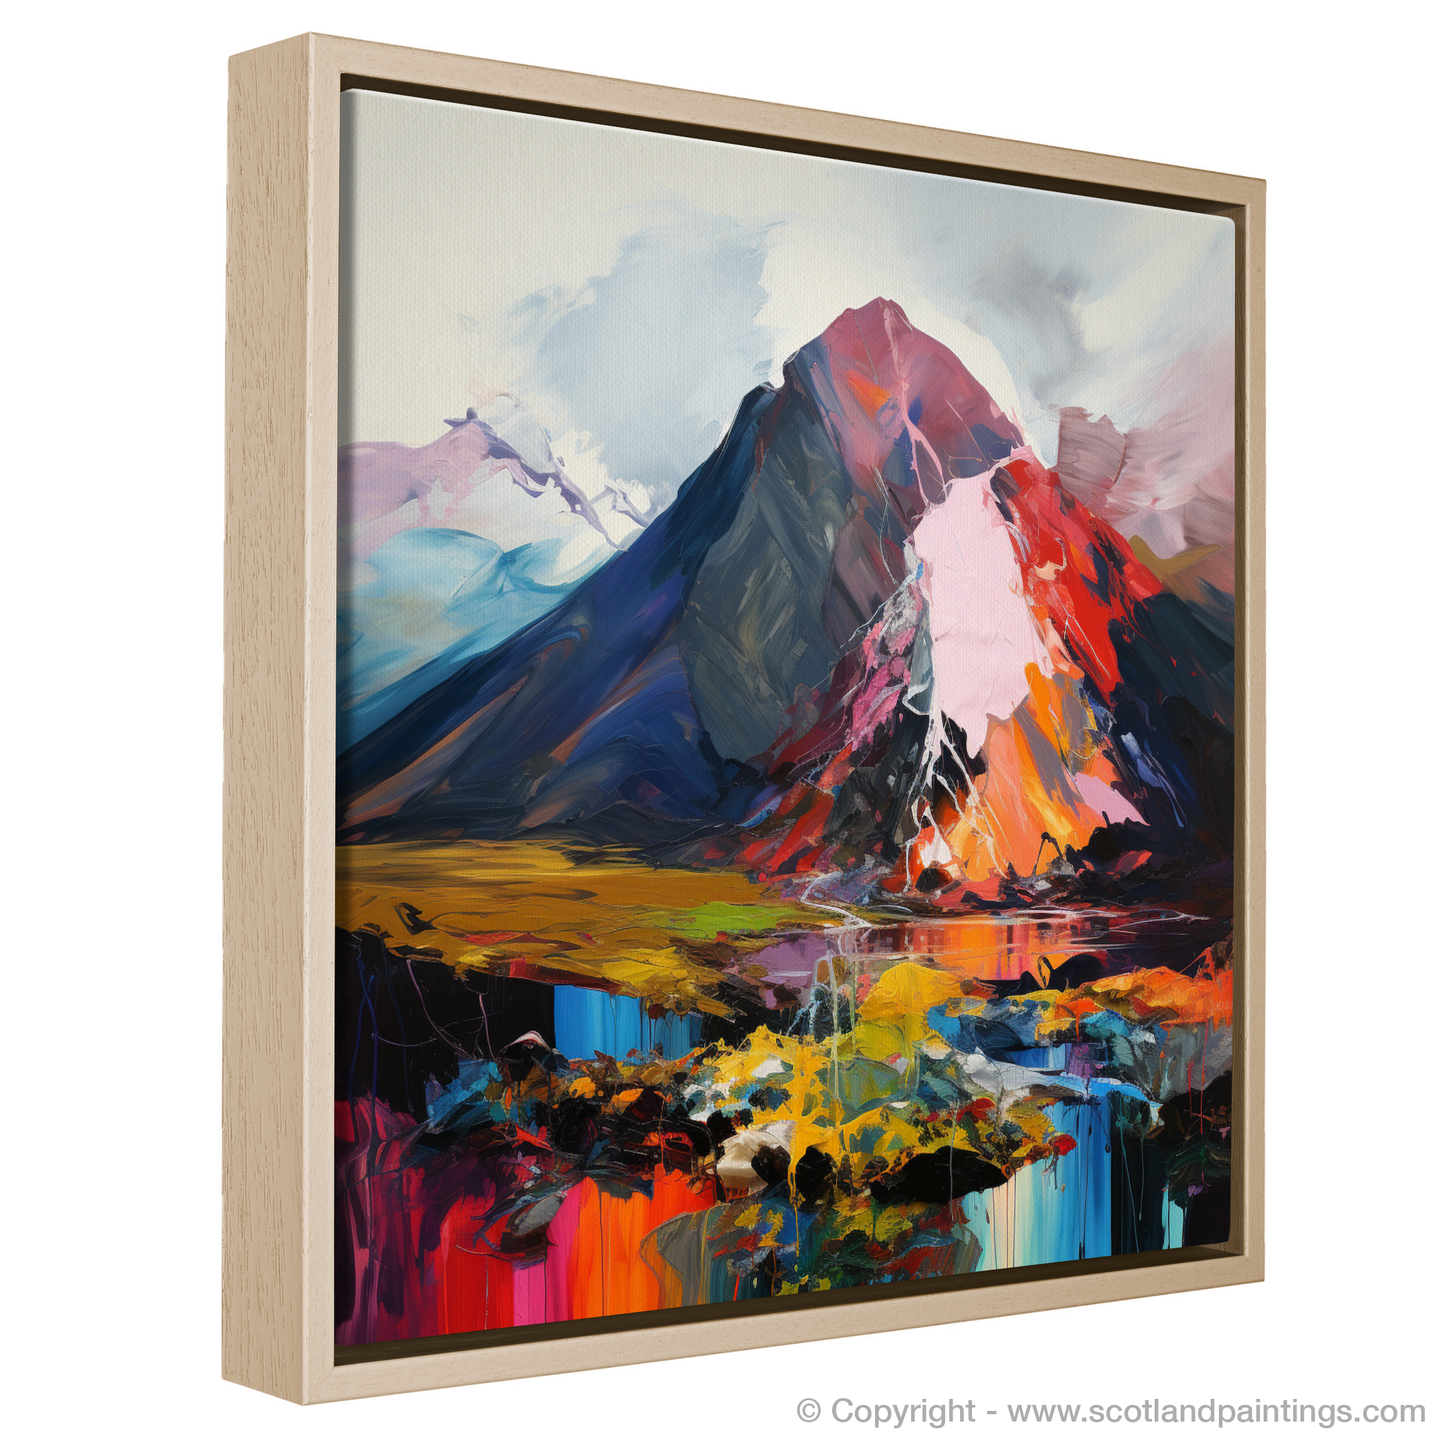 Painting and Art Print of Ben Nevis. Expressionist Tribute to Ben Nevis.